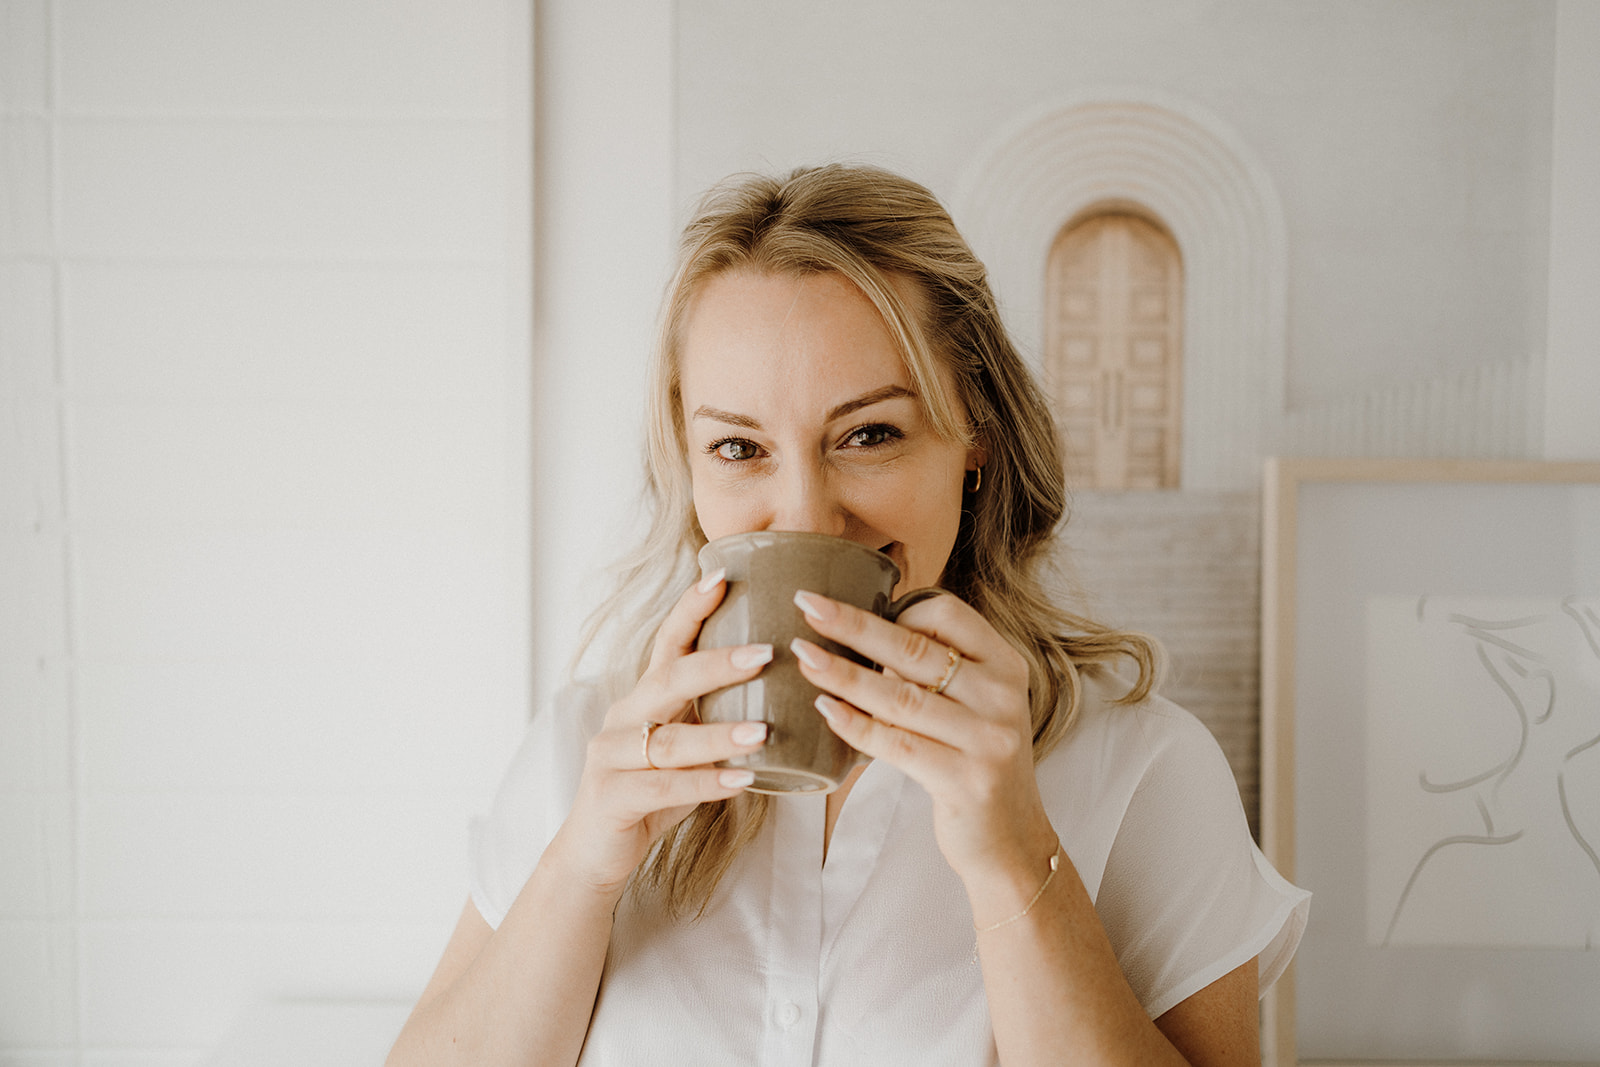 Lady standing holding a mug to her lips with both hands.